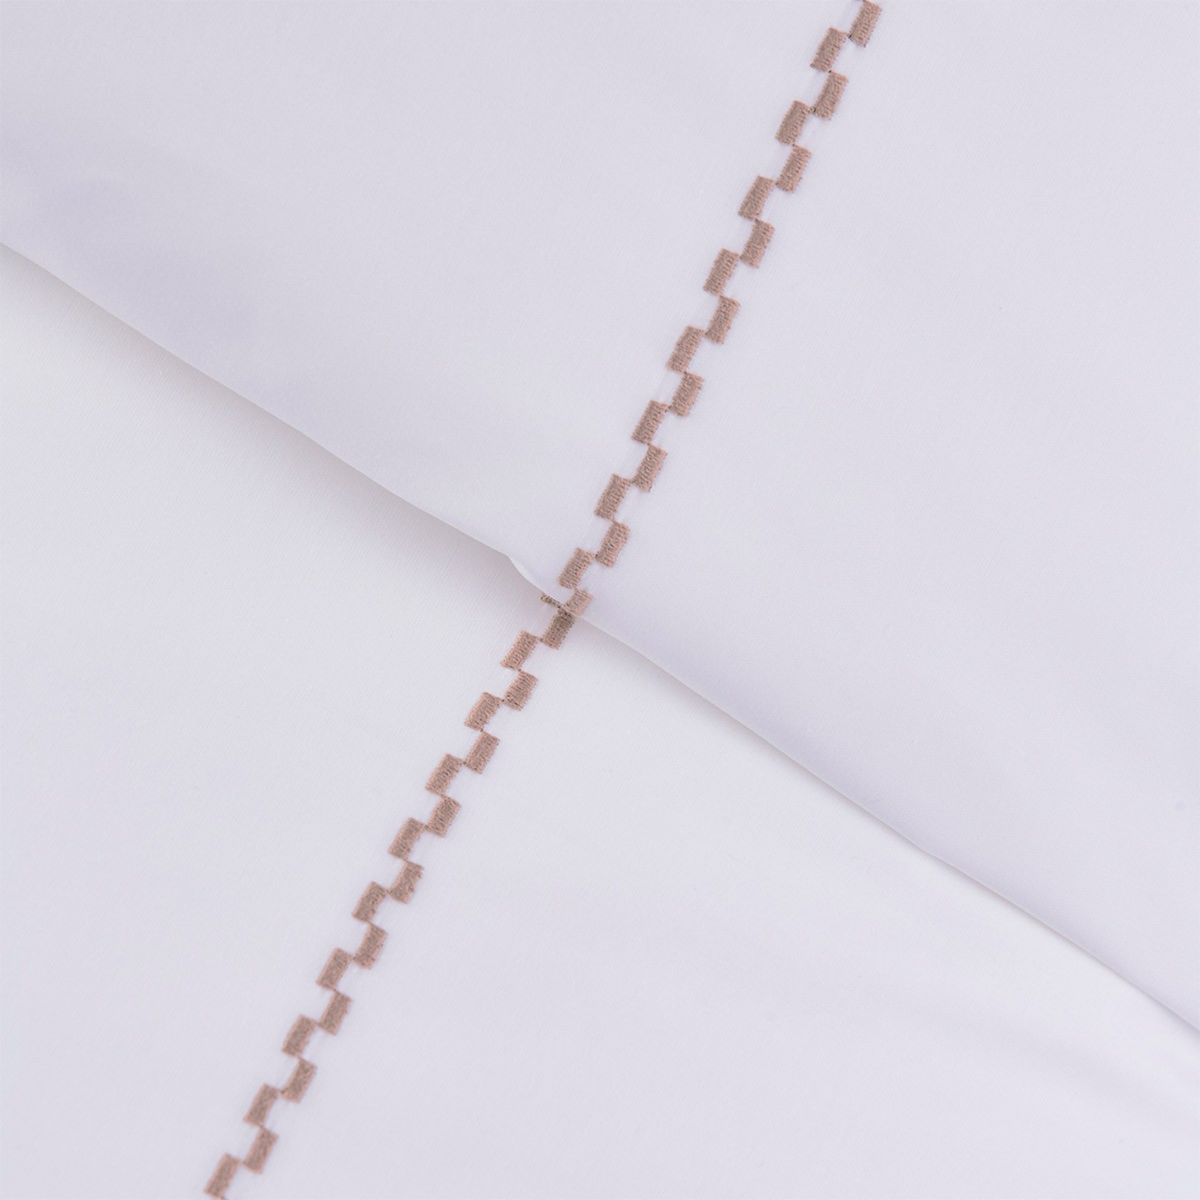 Embroidery Closeup of Yves Delorme Alienor Bedding in Sienna Color